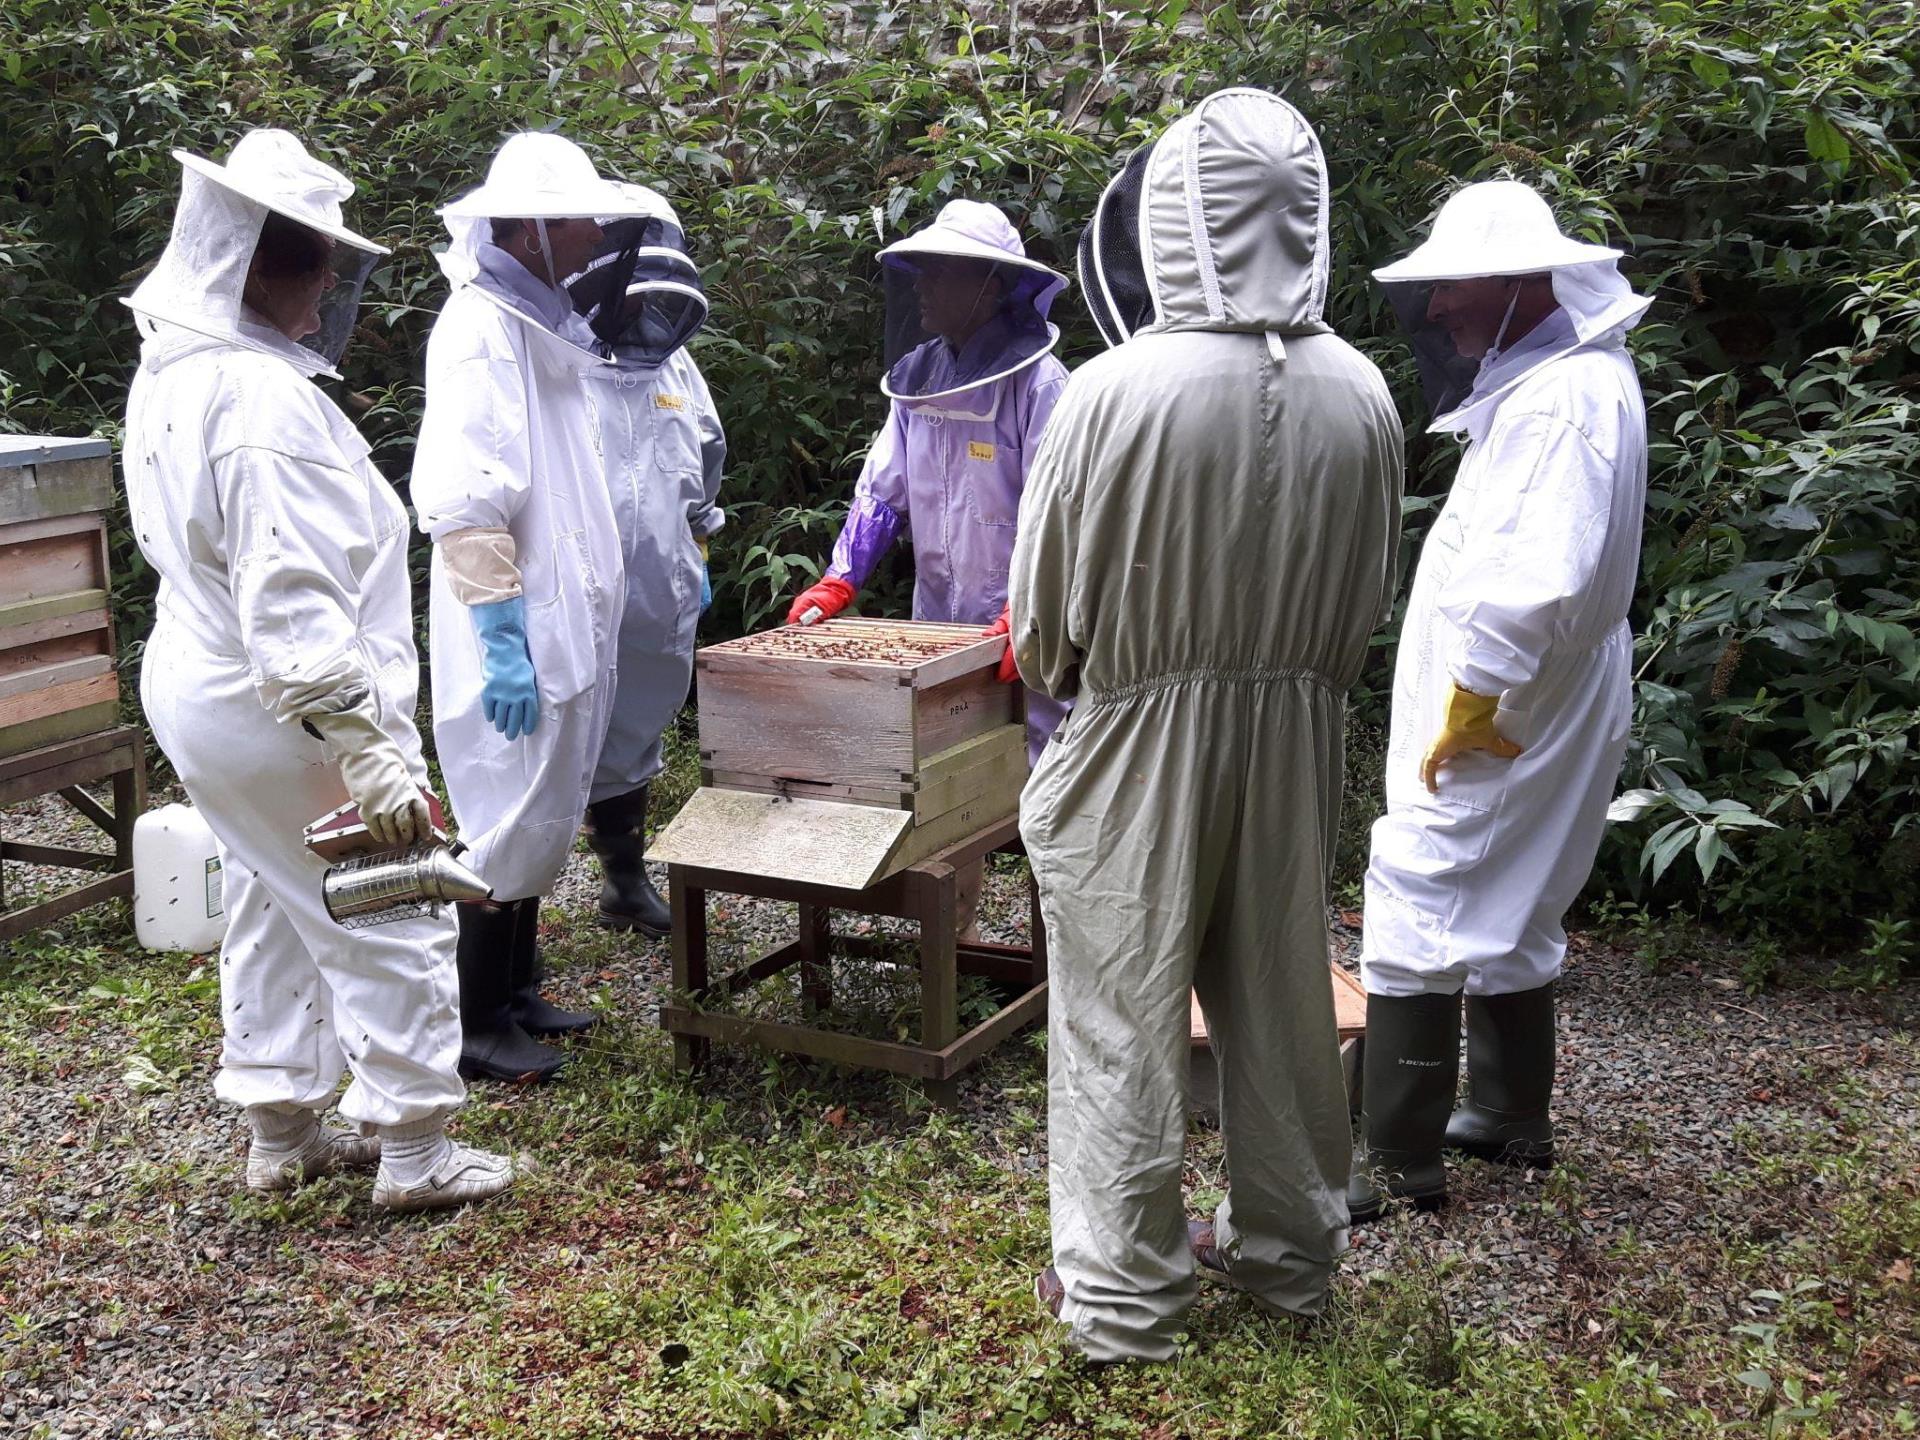 Beekeepers at Scolton Manor